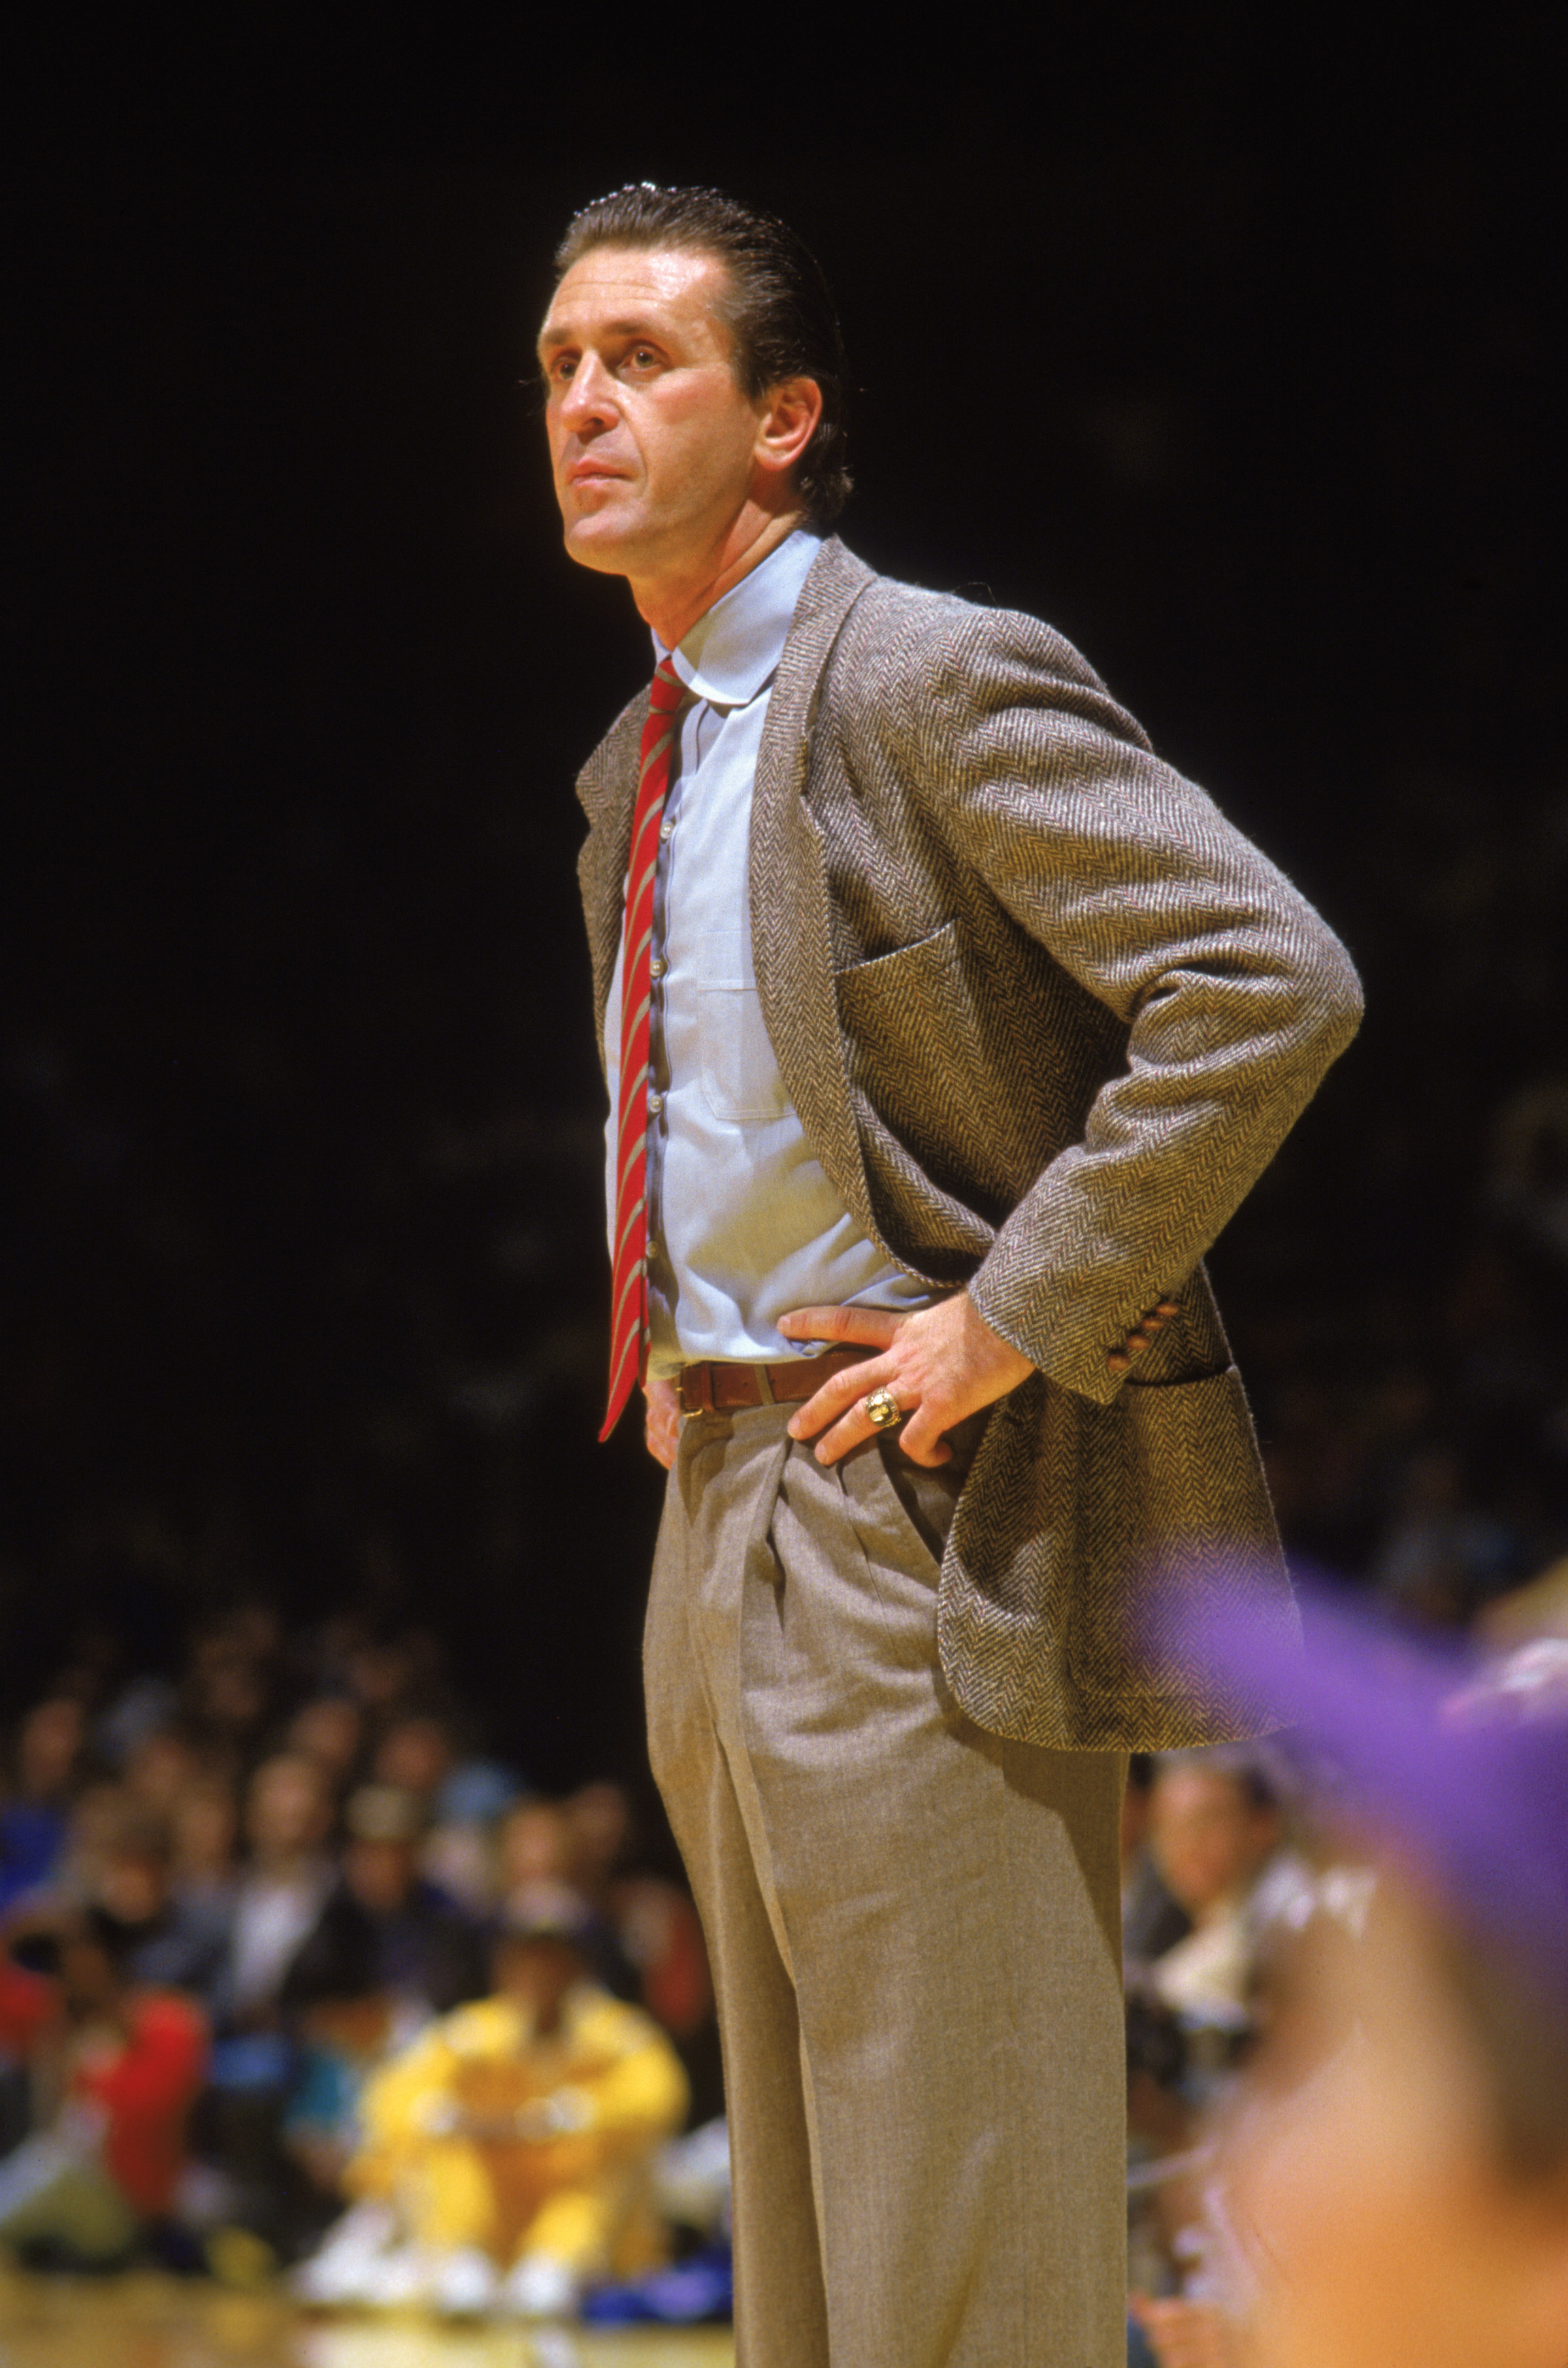 LOS ANGELES - 1987:  Head coach Pat Riley of the Los Angeles Lakers stands on the sideline during an NBA game at the Great Western Forum in Los Angeles, California in 1987.  (Photo by: Jonathan Daniel/Getty Images)